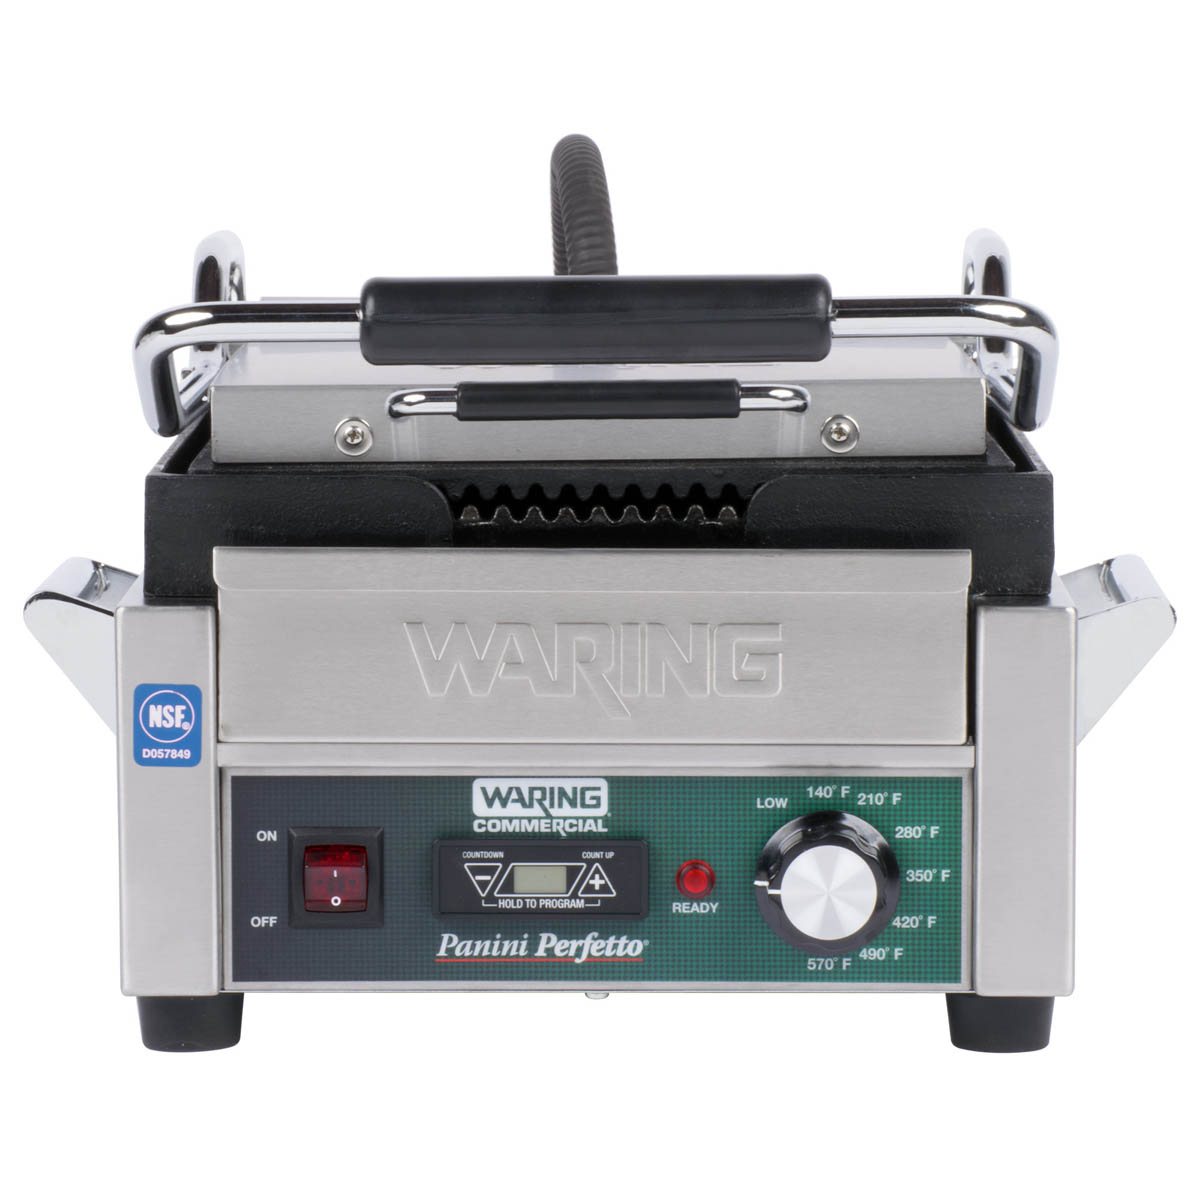 Waring 9.75'' Electric Grill Sandwich Maker & Panini Press with